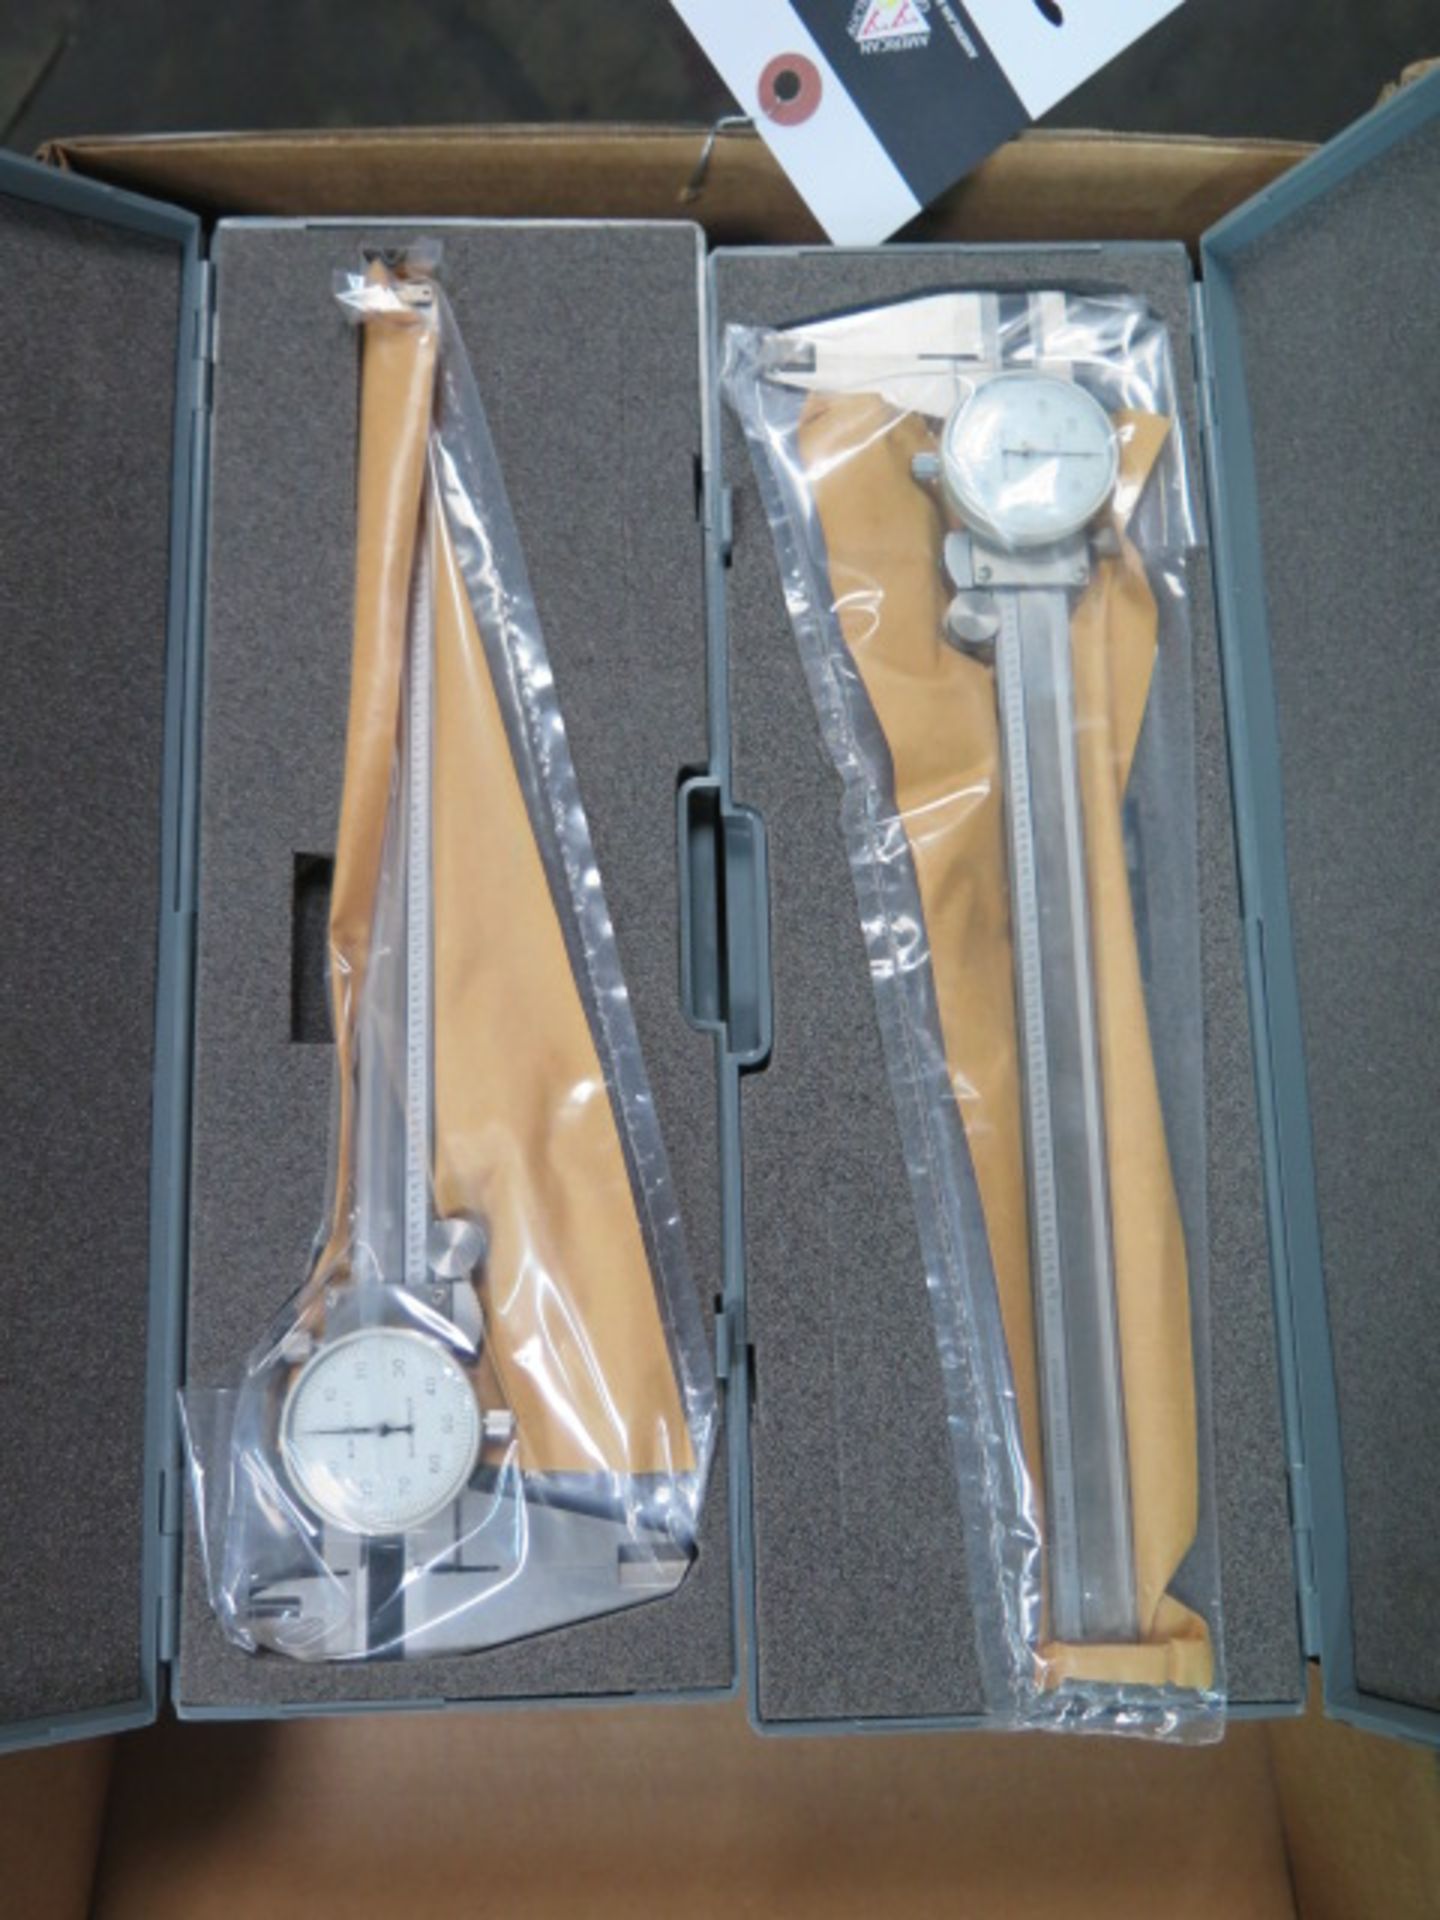 6" Dial Calipers (6) - Image 2 of 2